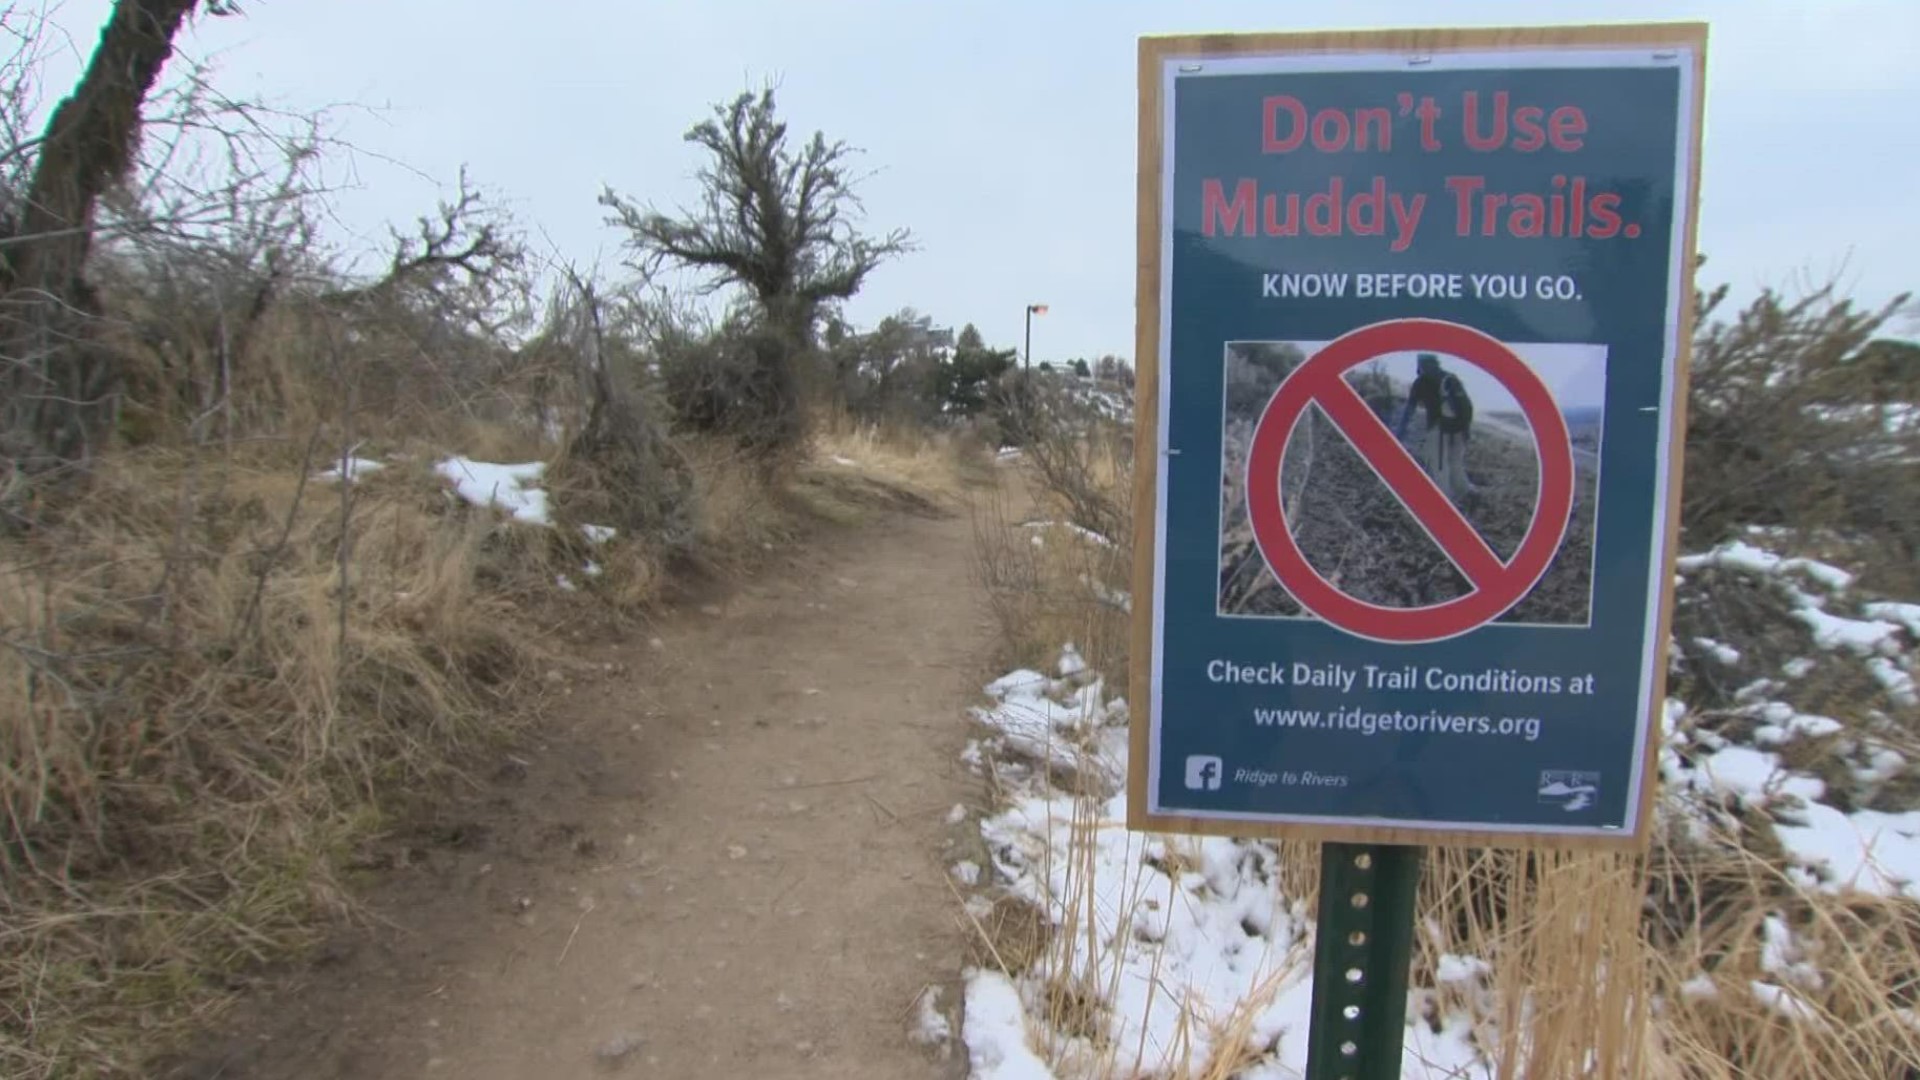 The tool is set to help trail-goers avoid muddy paths that can be damaged this time of year in Boise.